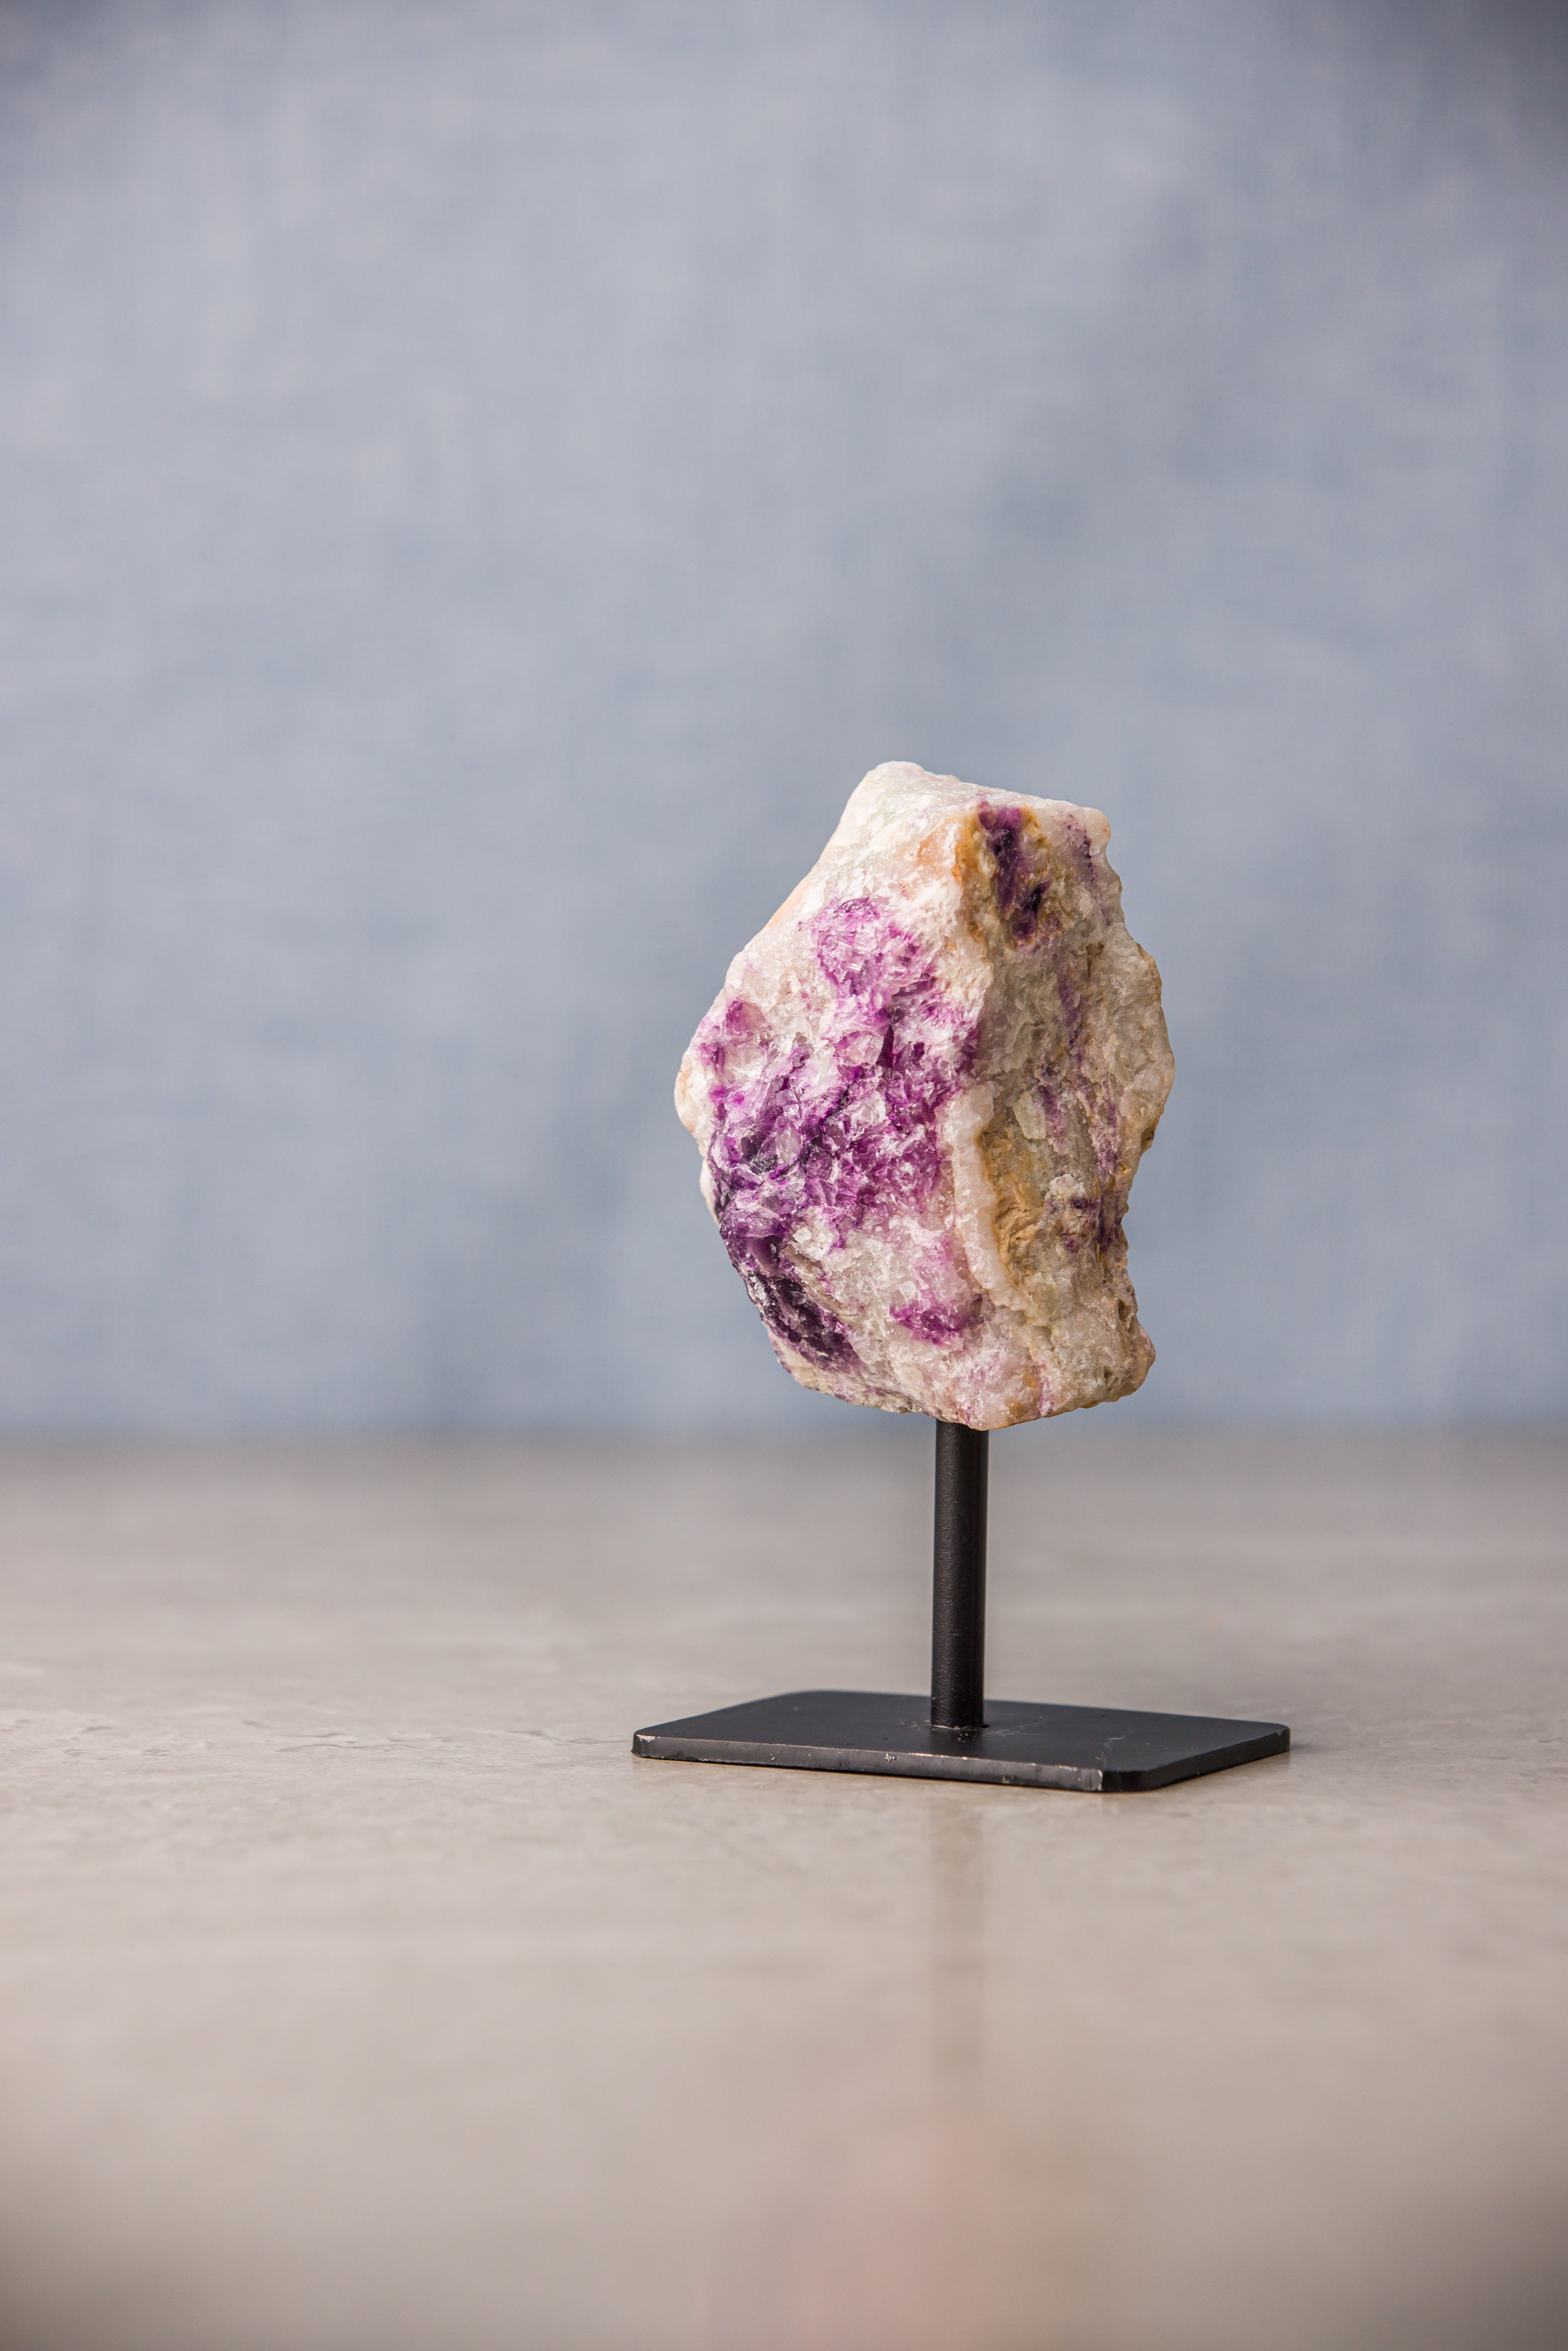 Small Fluorite Crystal on Stand - Versatile Display Piece for Mental Clarity &amp; Focus Product Description - Everyday Rocks